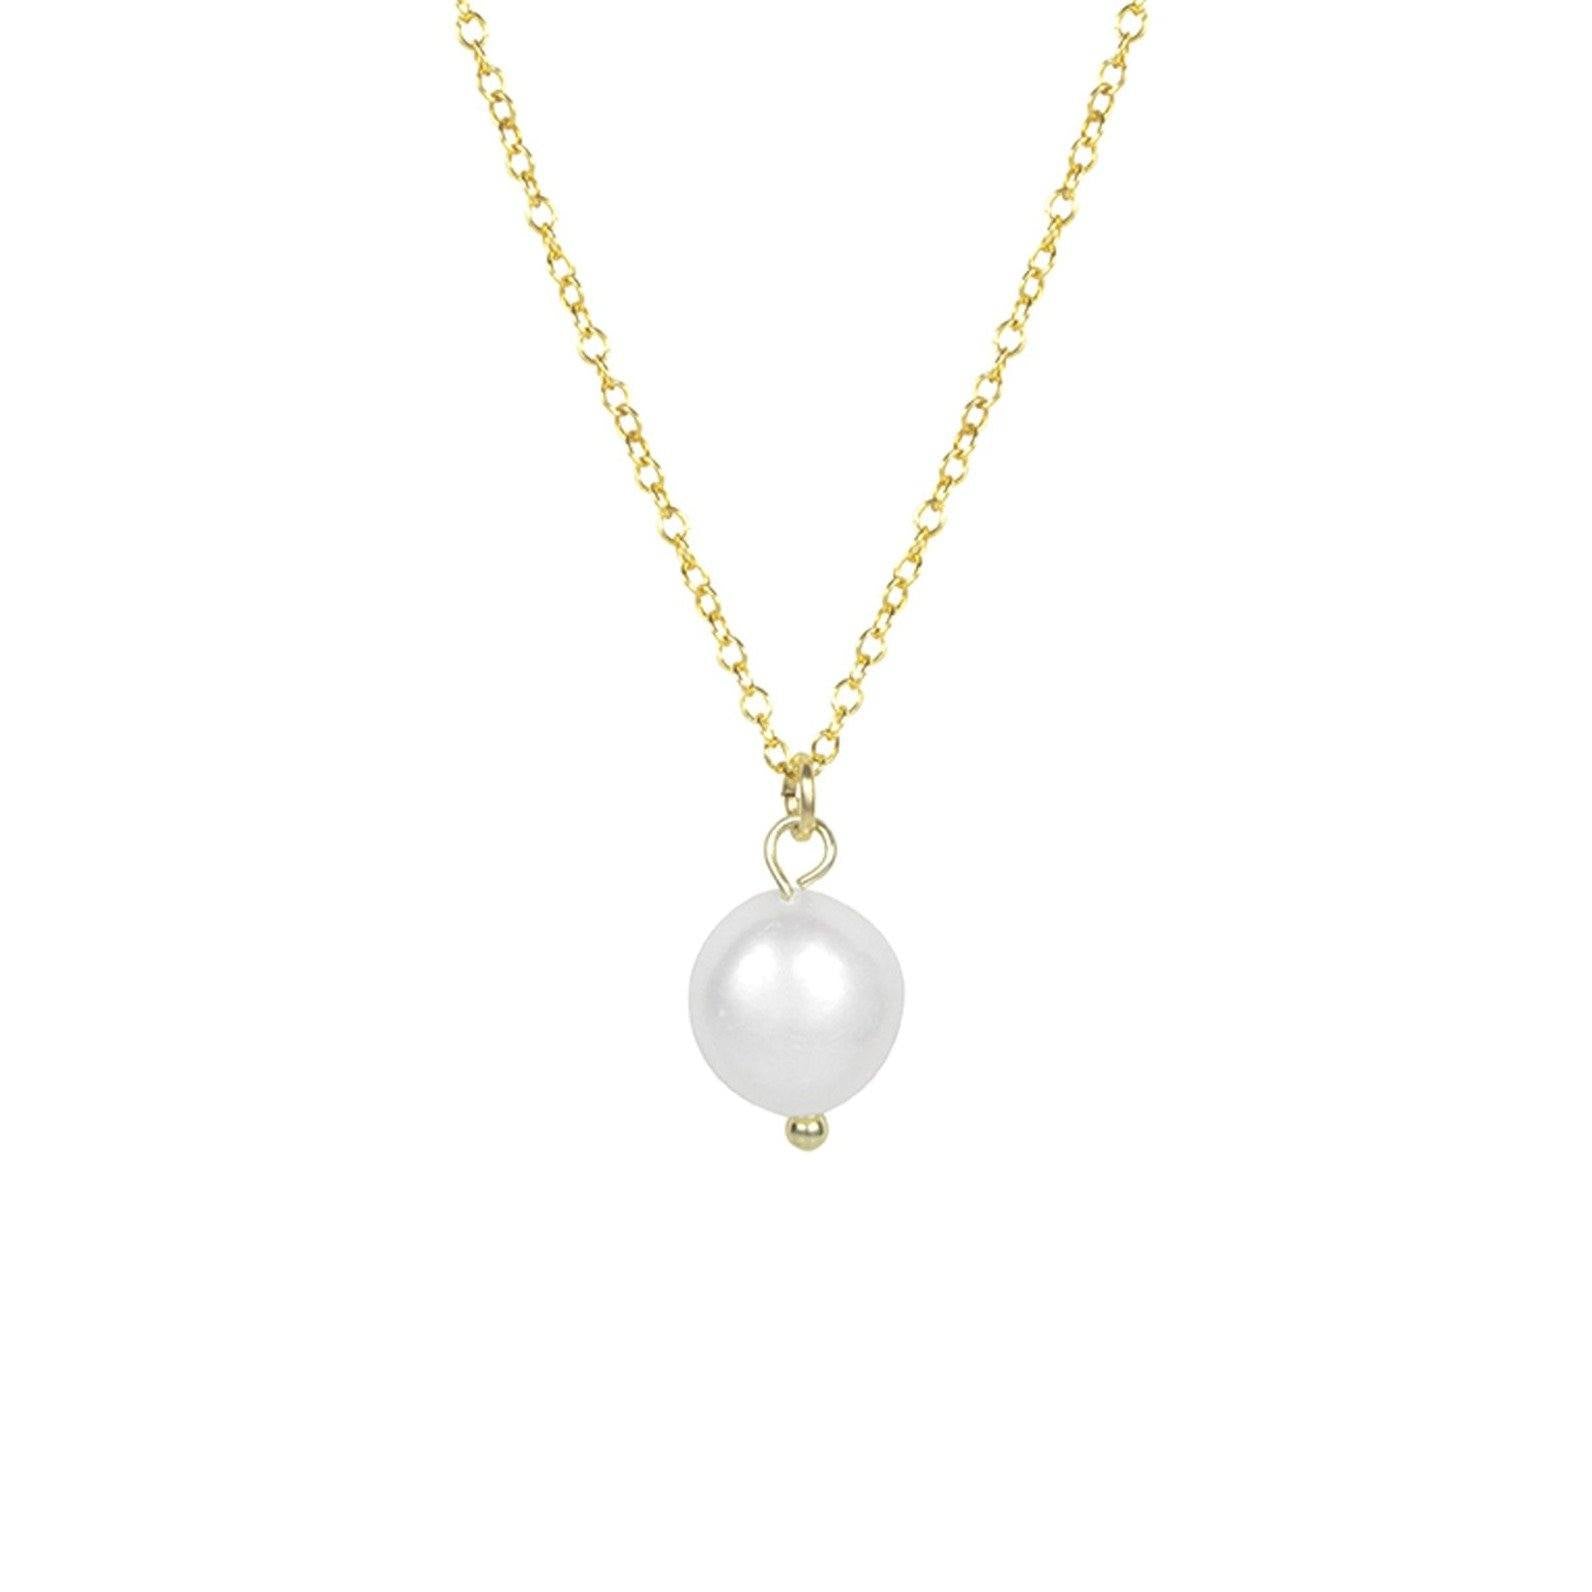 Dainty gold long Pearl Pendant Necklace, Pearl collection, handmade in America by Katie Dean Jewelry